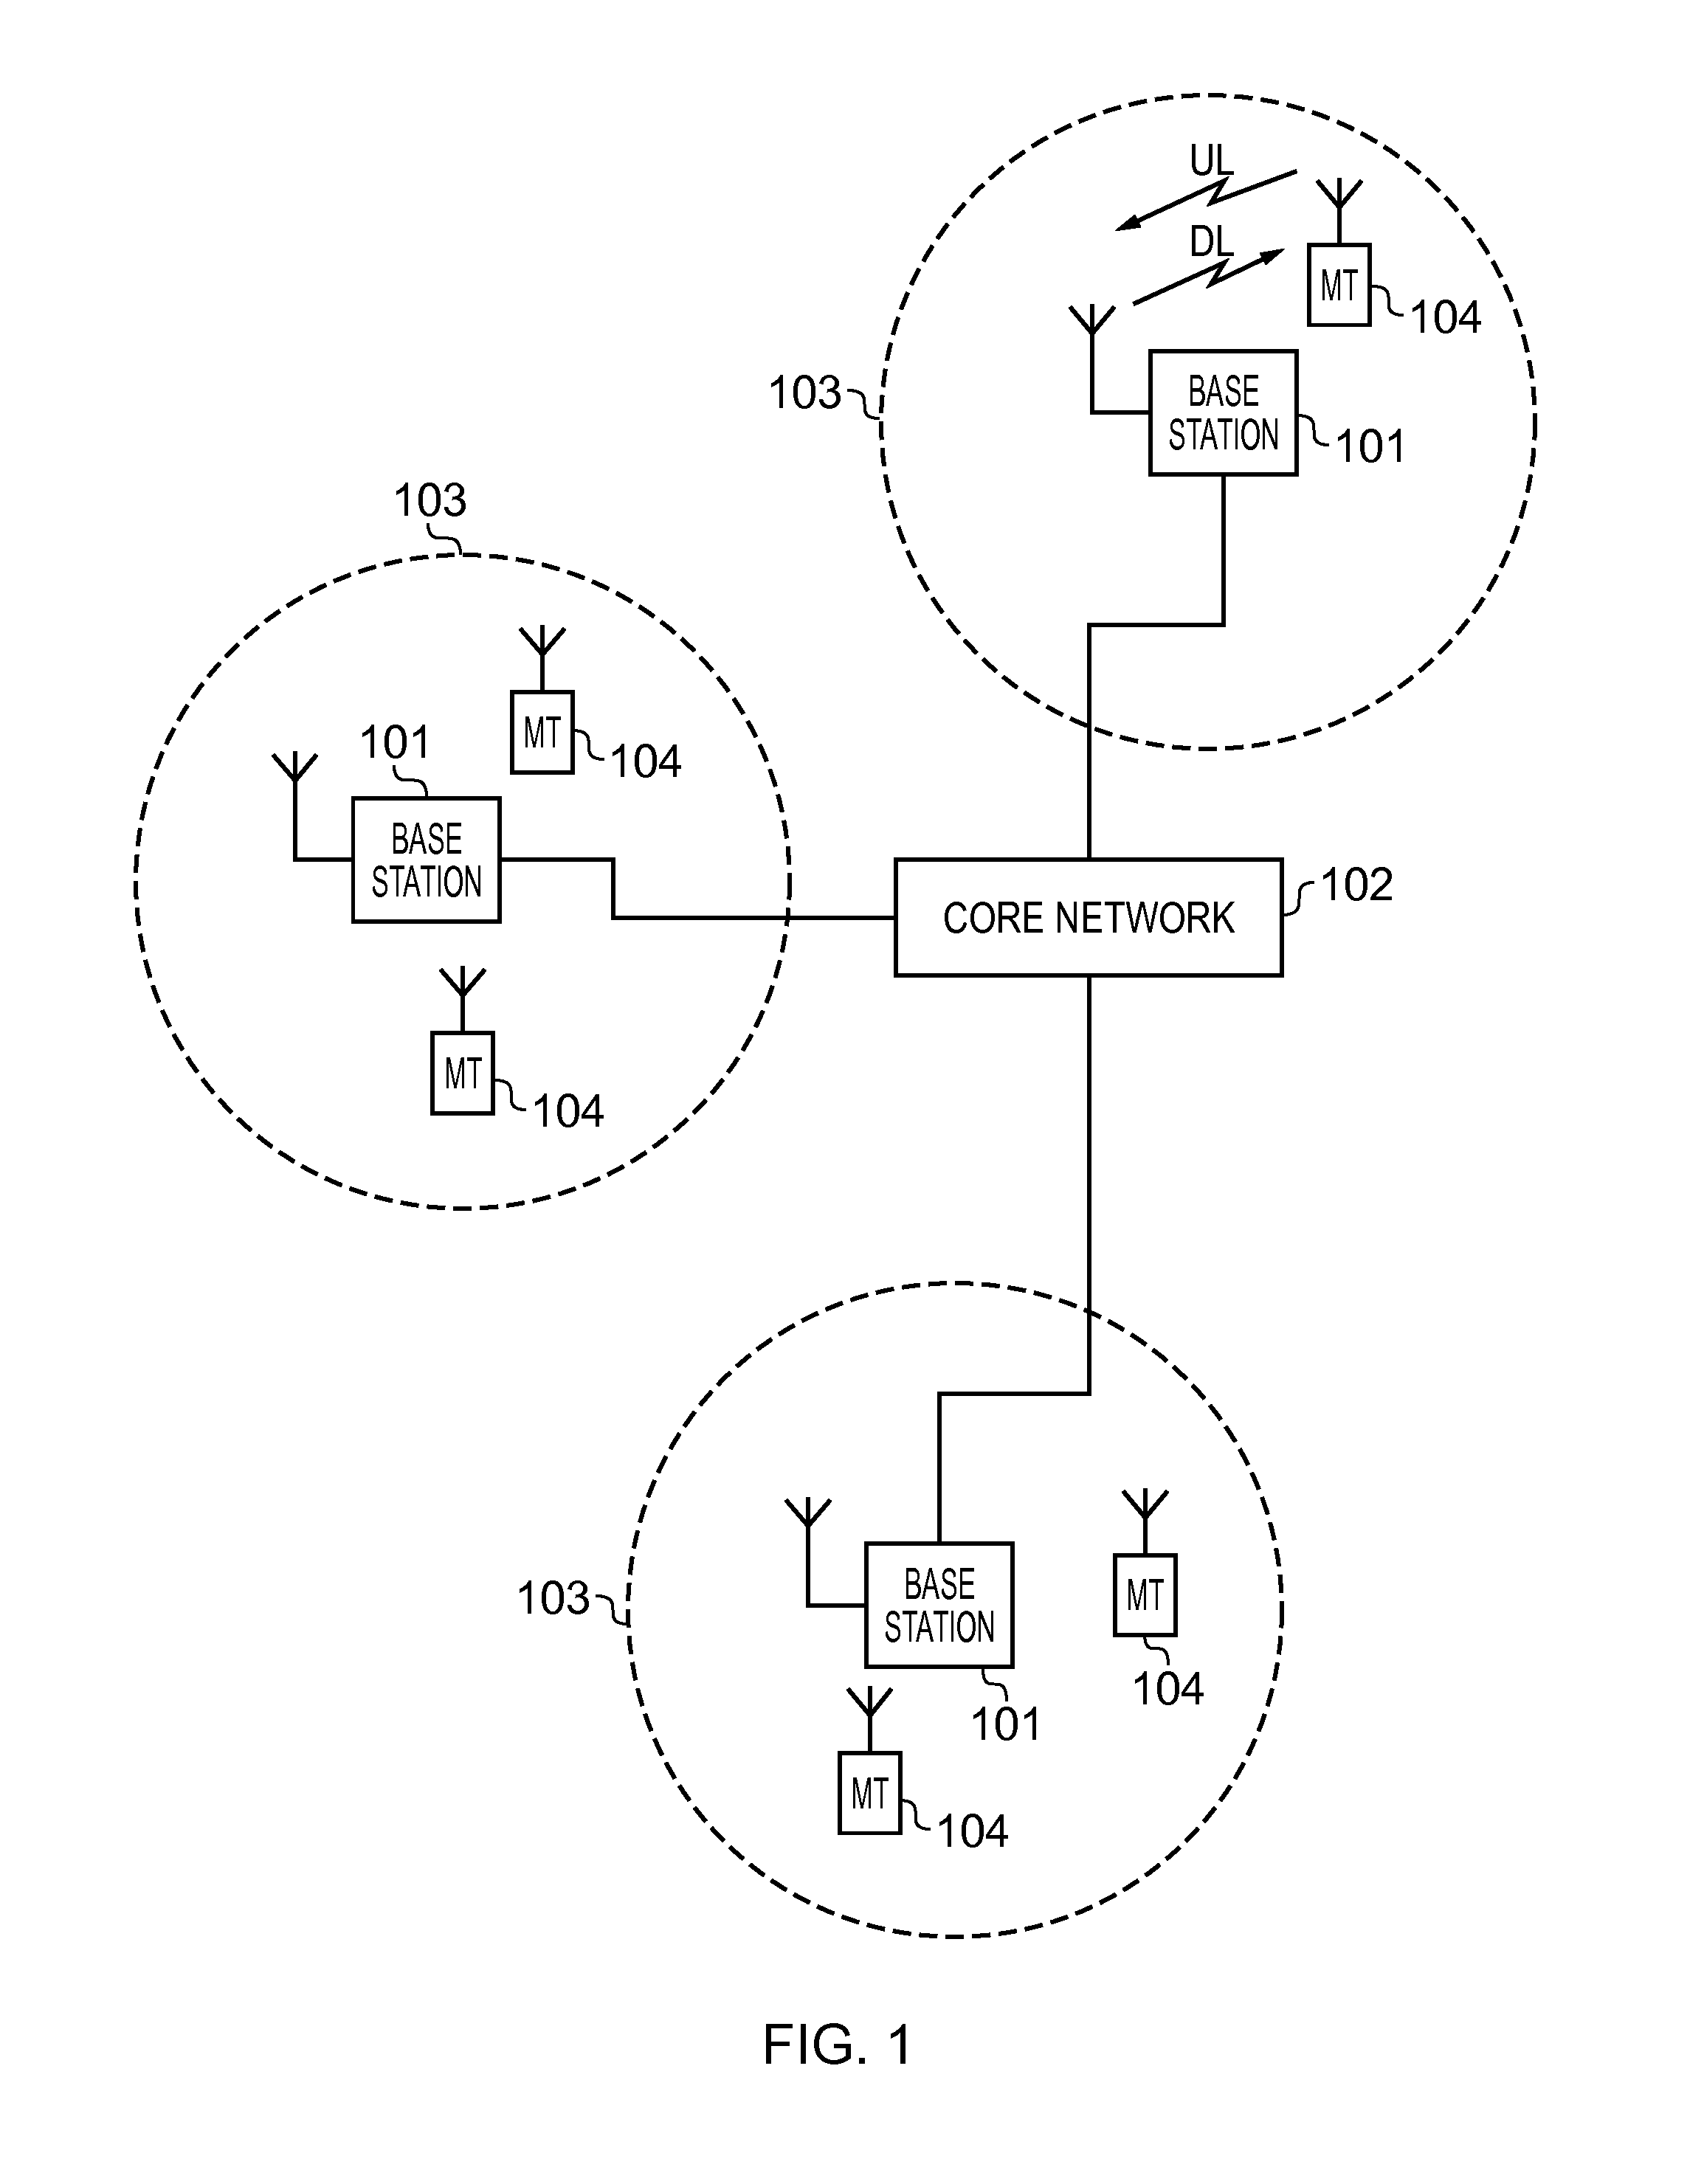 Allocating resources and transmitting data in mobile telecommunication systems comprising machine type communication applications